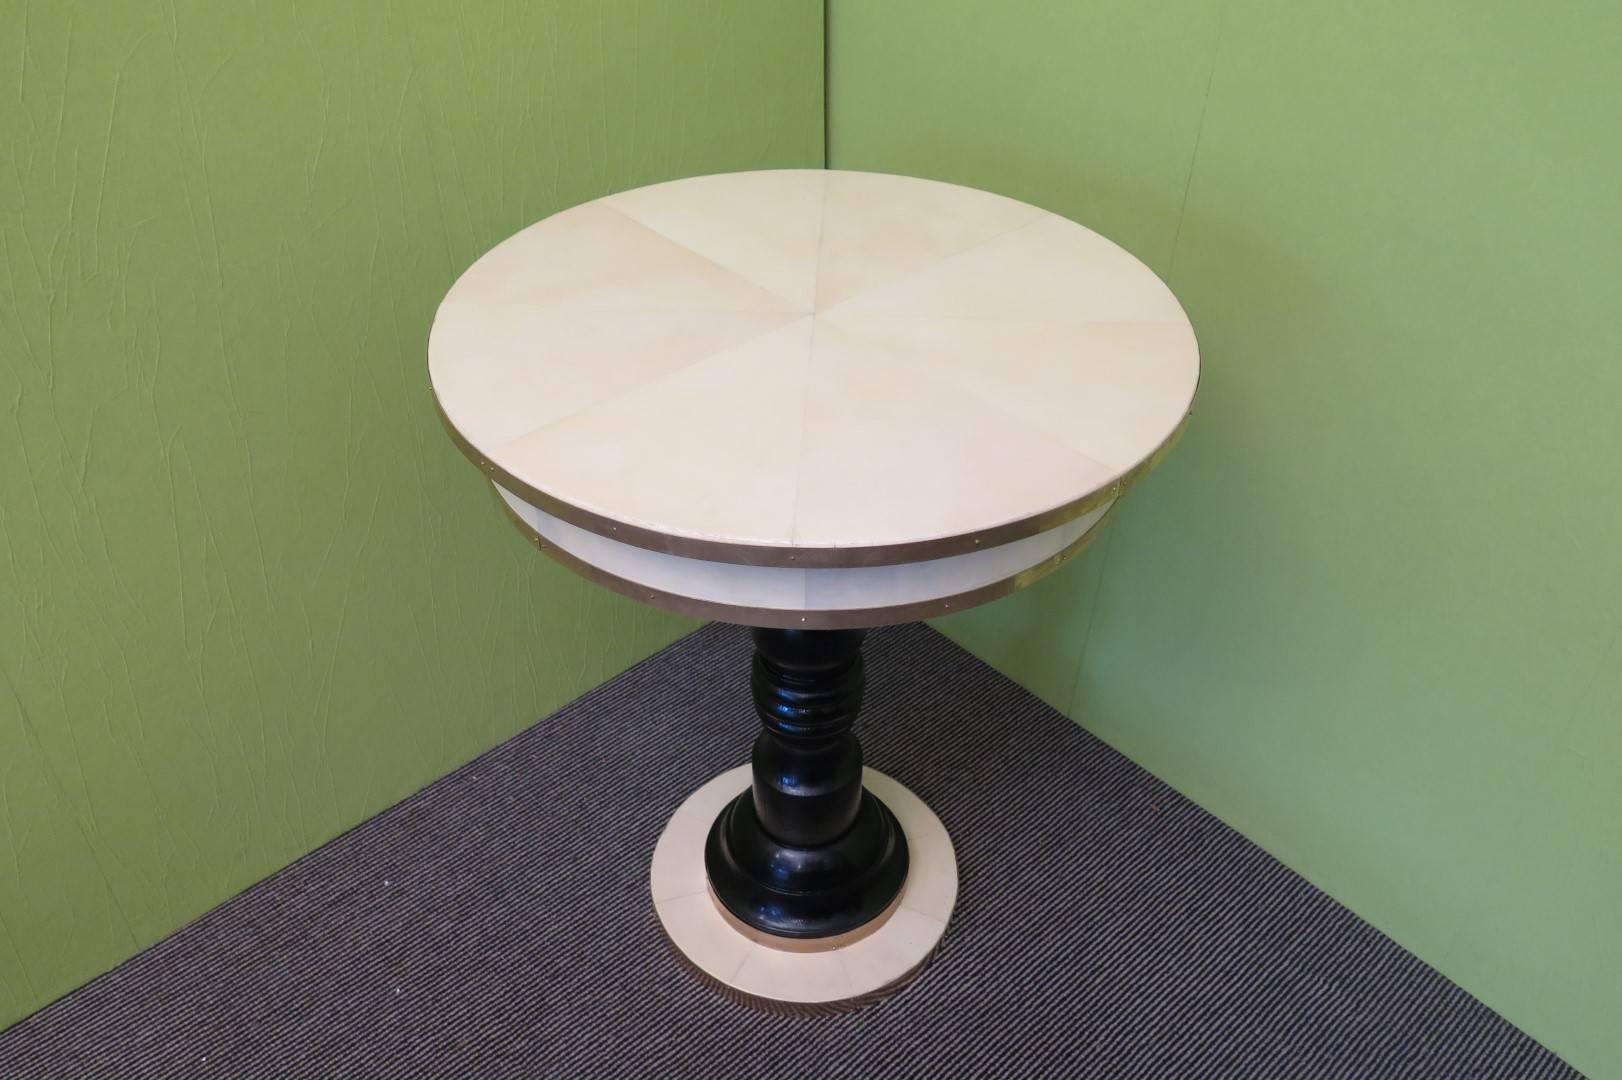 Italian Art Deco side table. Top covered in parchment leather and edged with a brass band. Even the band below the top is covered in parchment leather and finished with brass. The legs are single and central is polished in black lacquer. This is